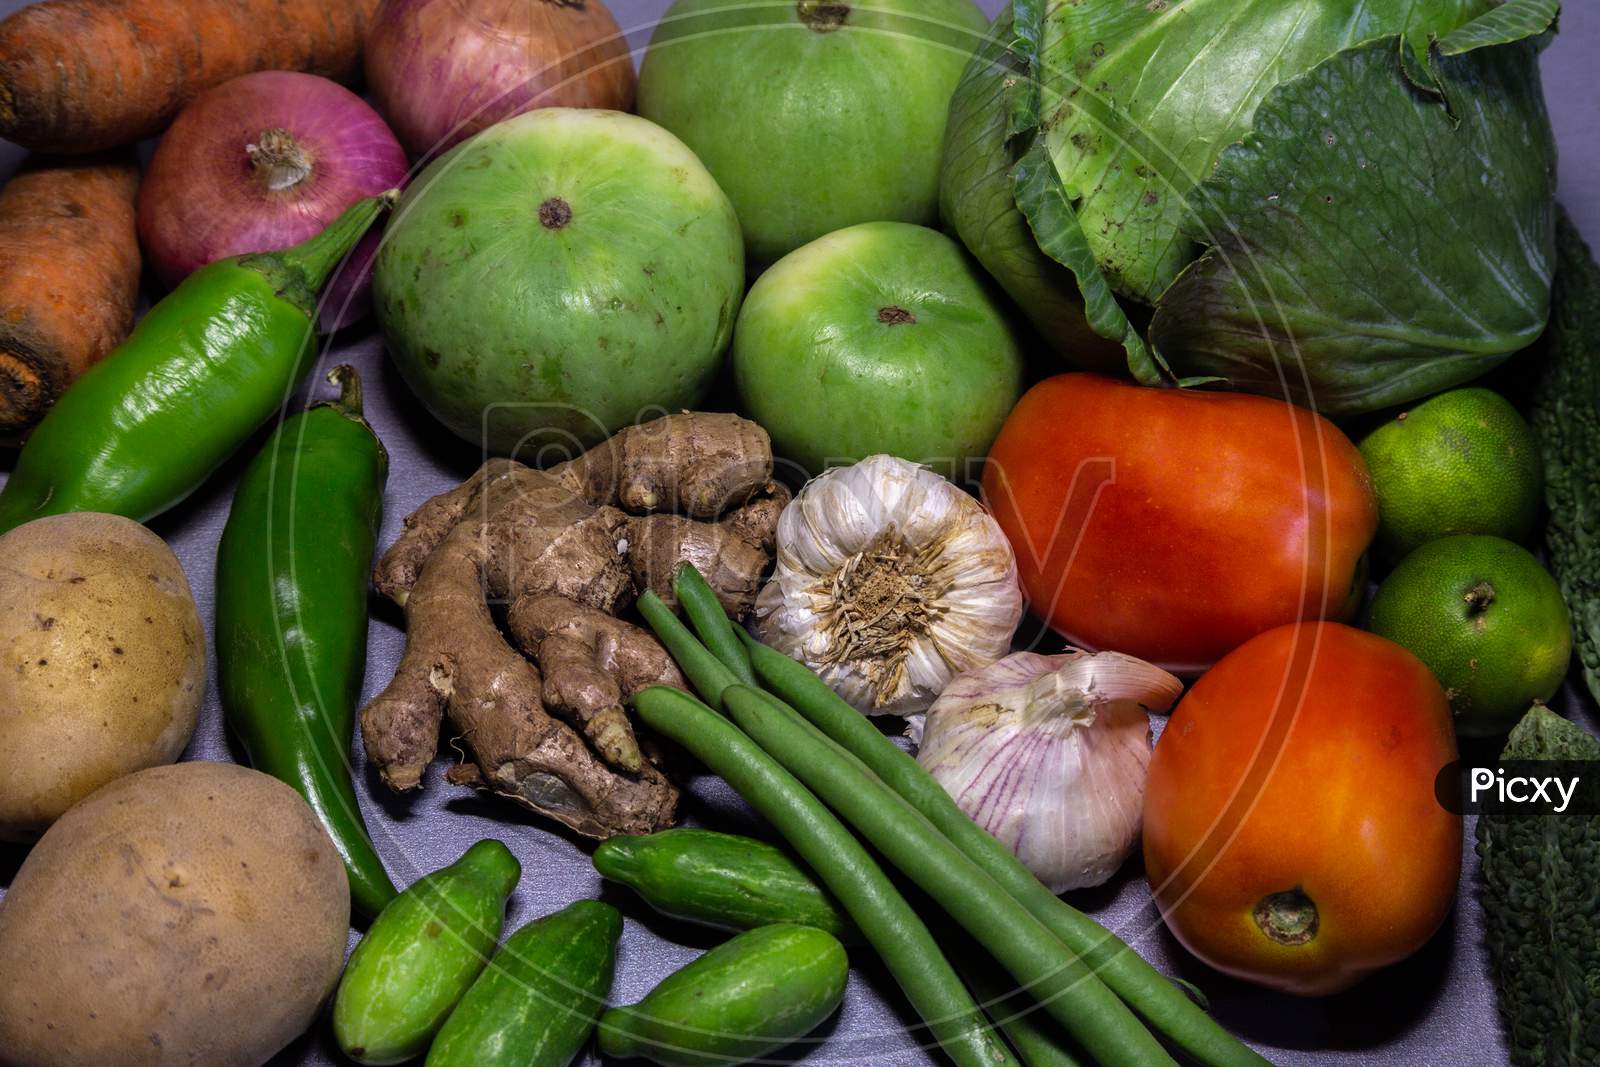 Different varieties of vegetables from Indian market